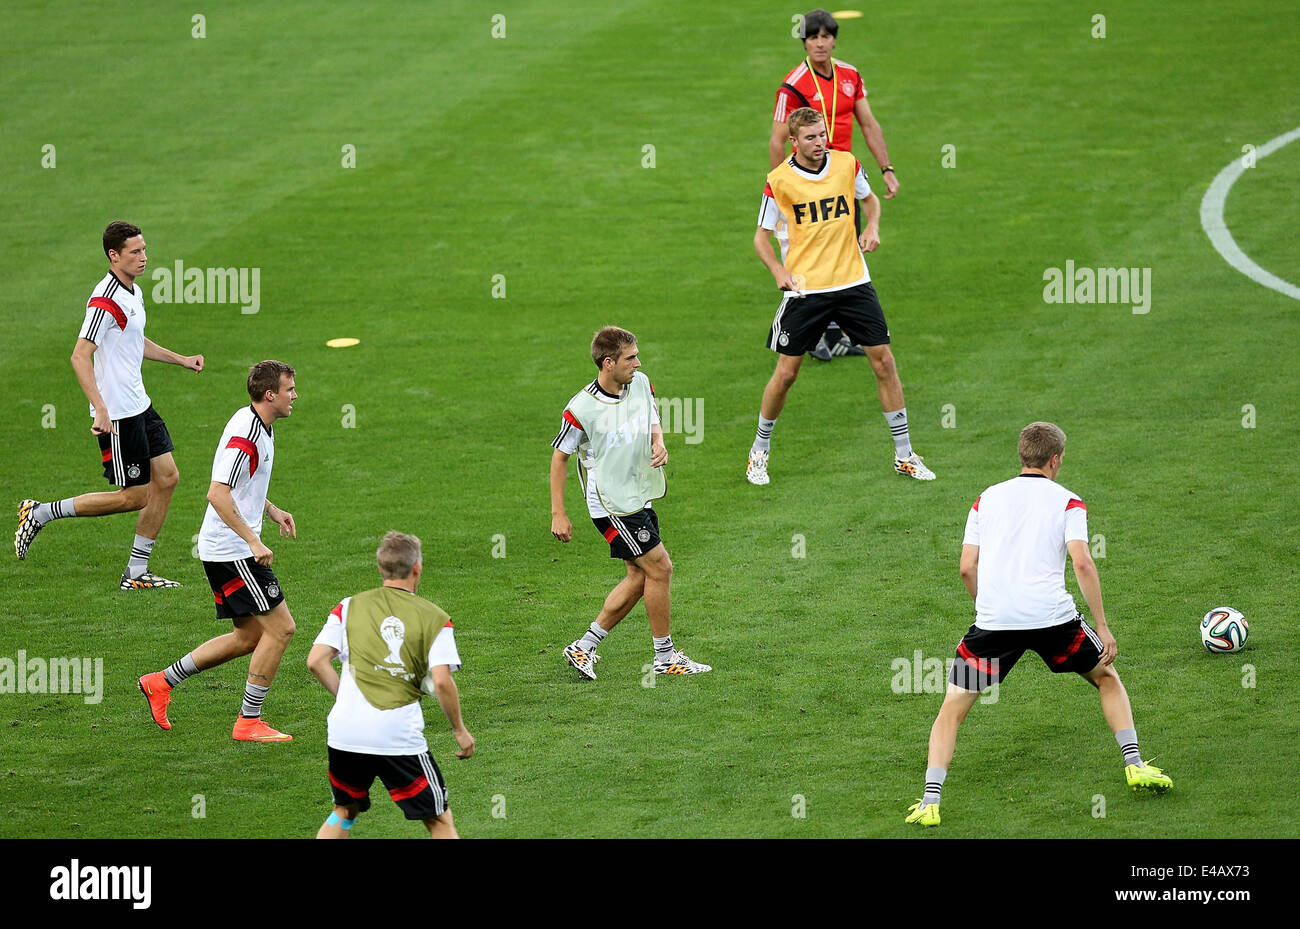 Belo Horizonte, Brazil. 7th July, 2014. Philipp Lahm (4th L) of Germany takes part in a training session in Belo Horizonte, Brazil, on July 7, 2014. Germany will play Brazil in their 2014 World Cup semifinal here on July 8. © Li Ming/Xinhua/Alamy Live News Stock Photo